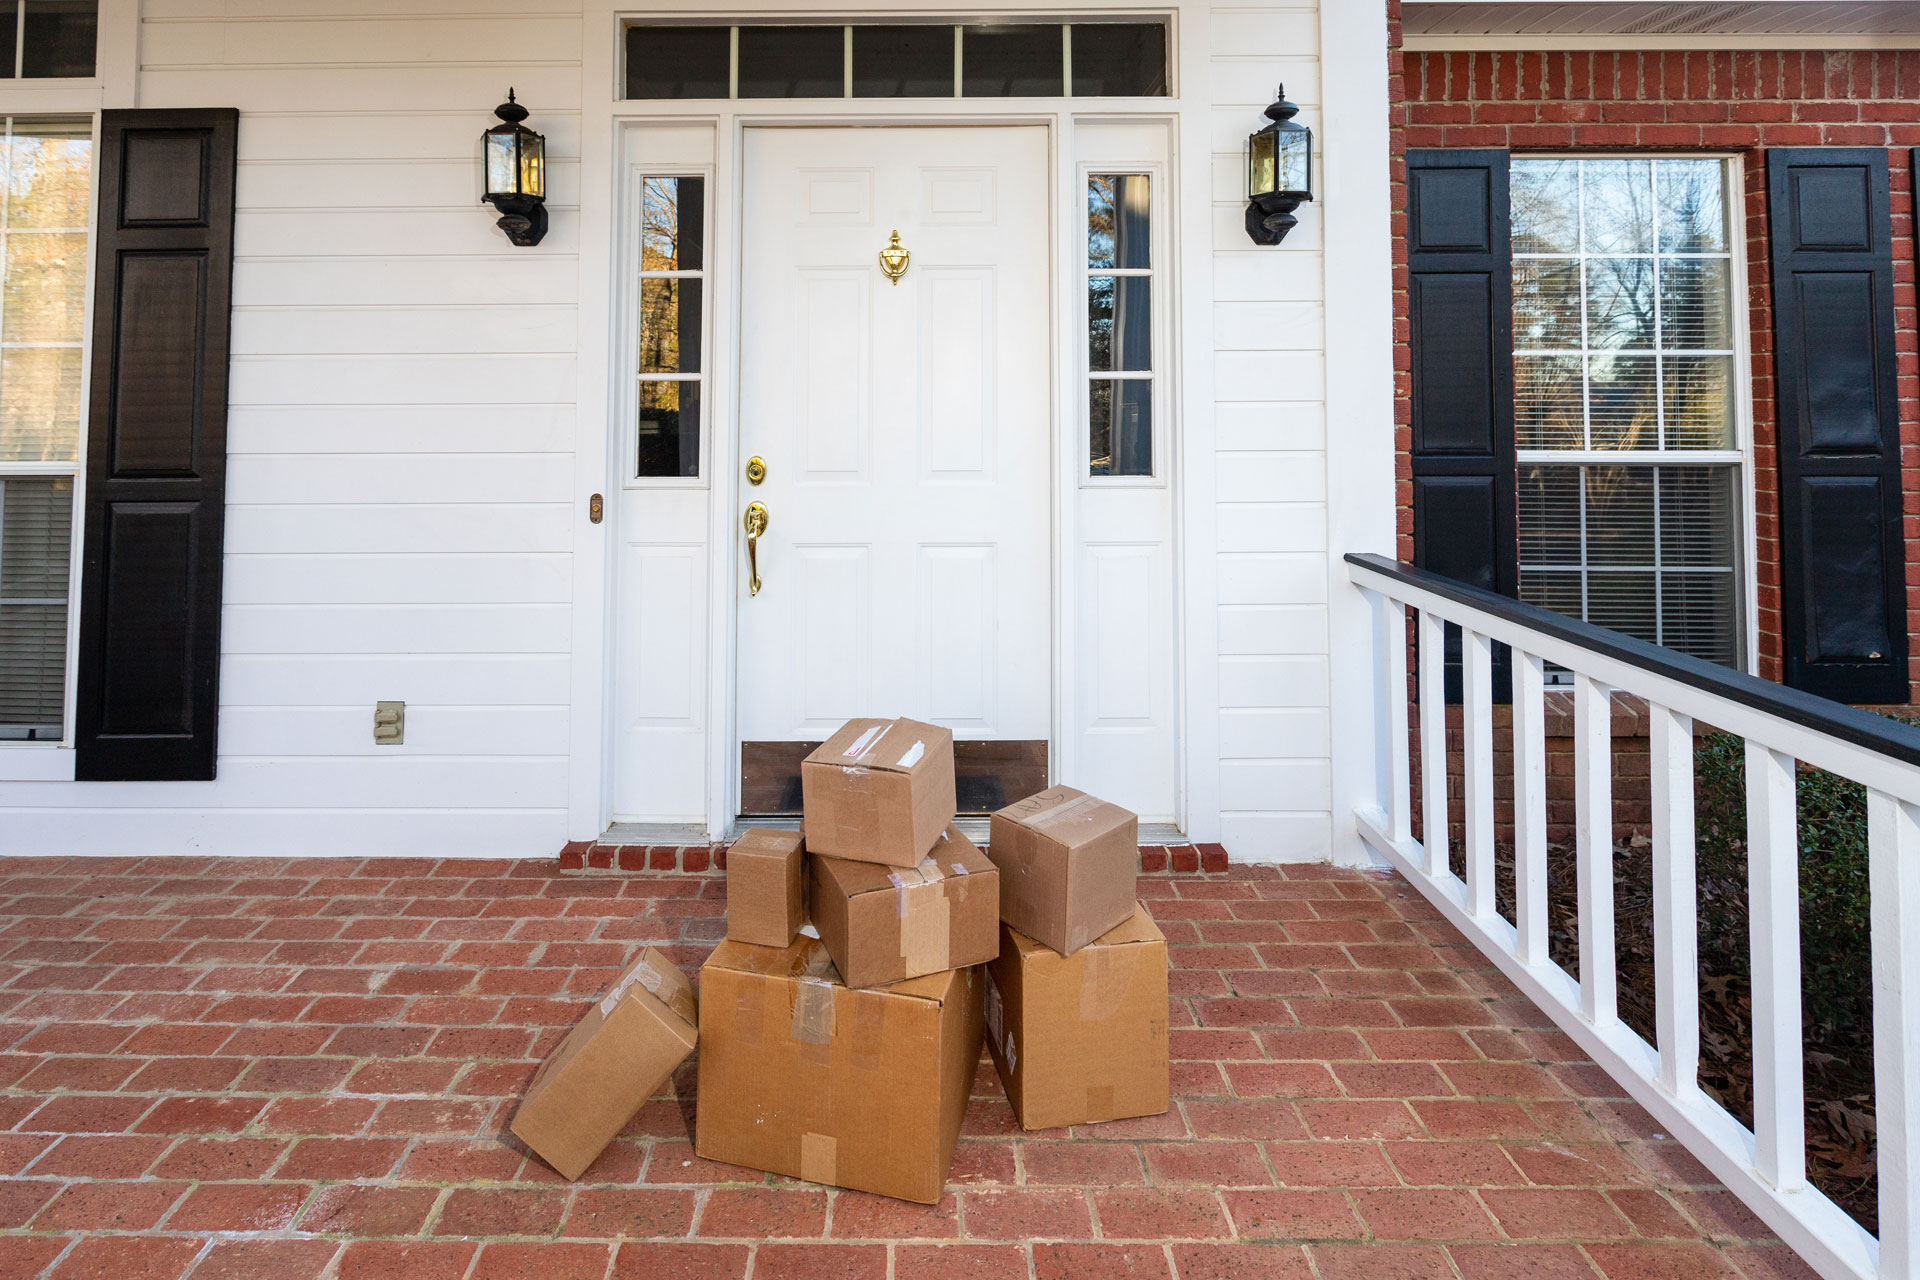 Packages on a doorstep